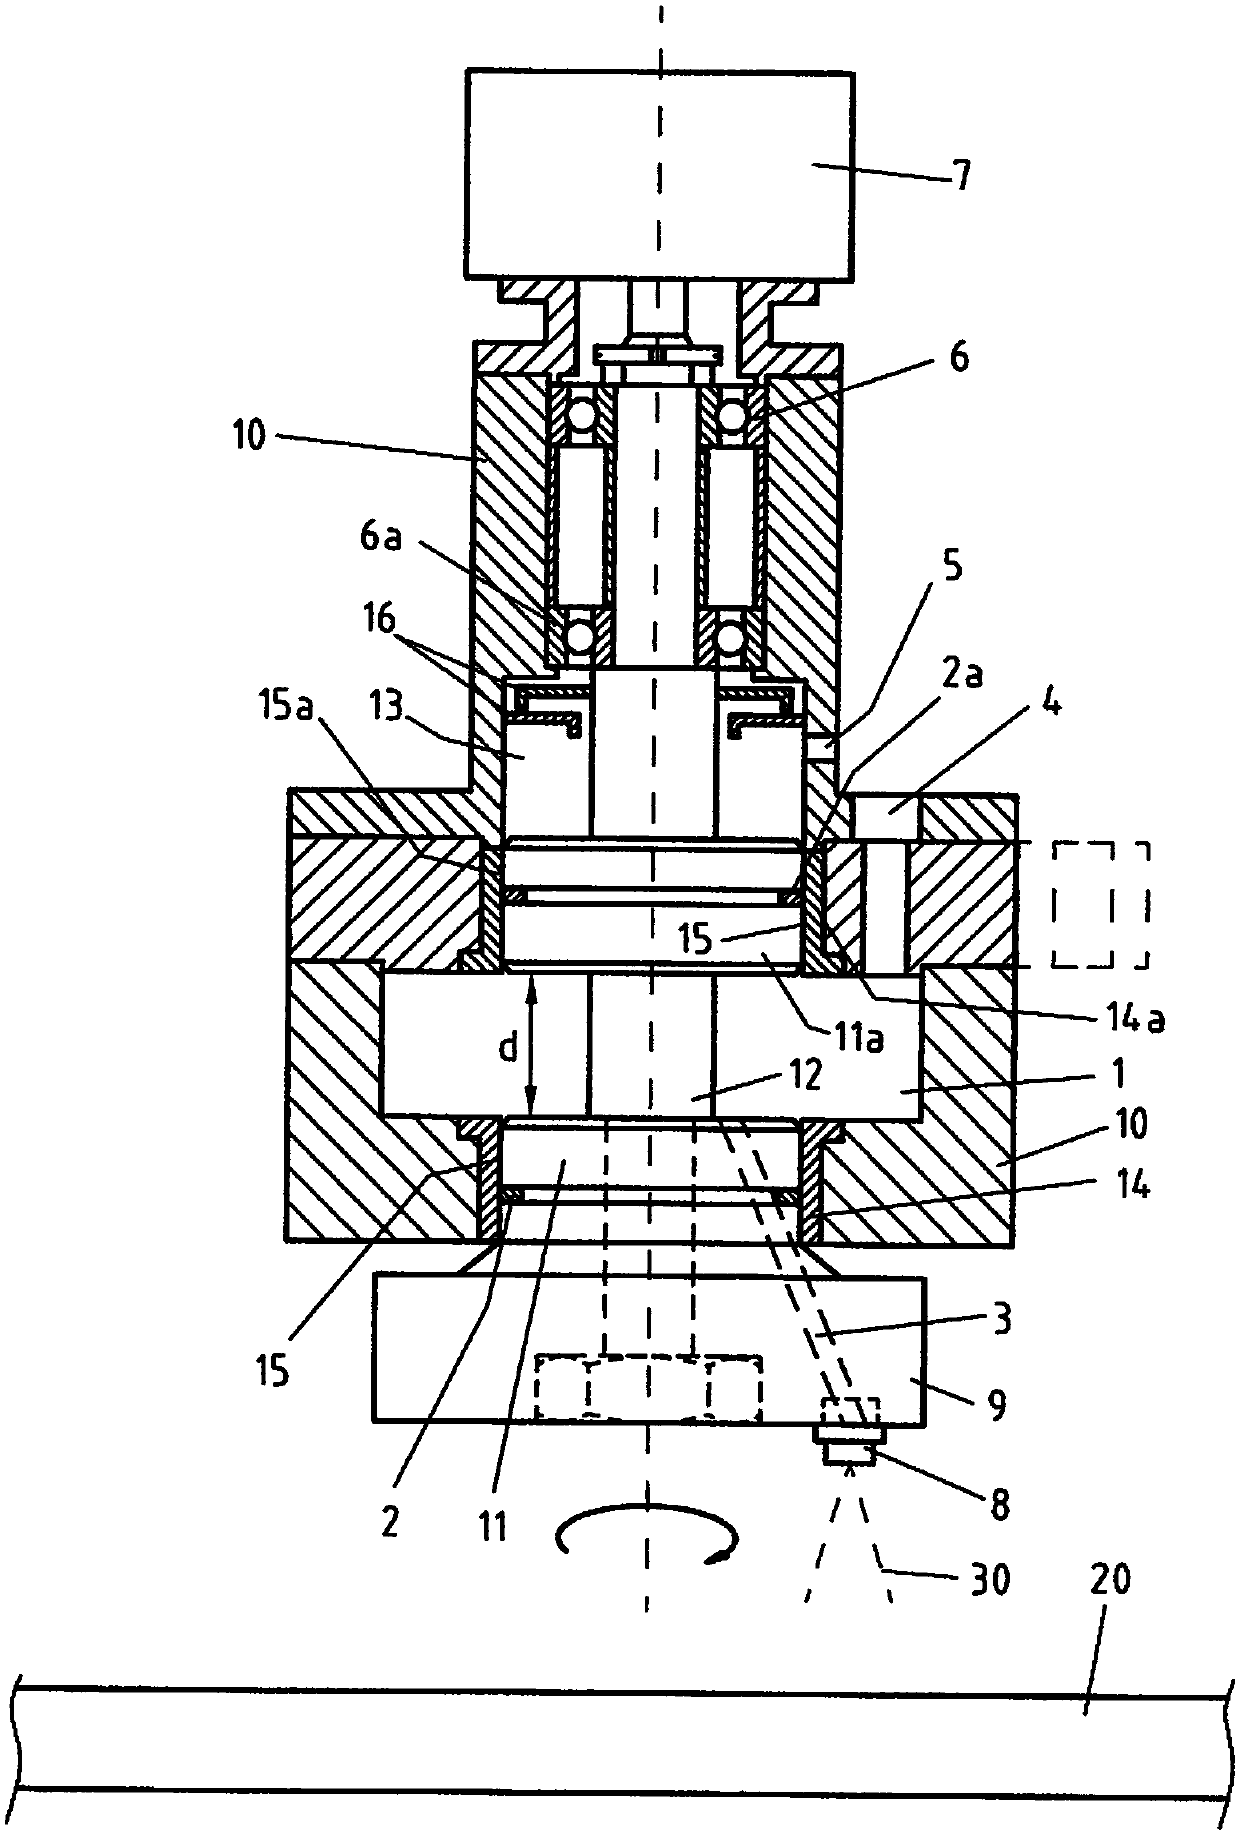 Apparatus for descaling the surface of ingots or rolled products